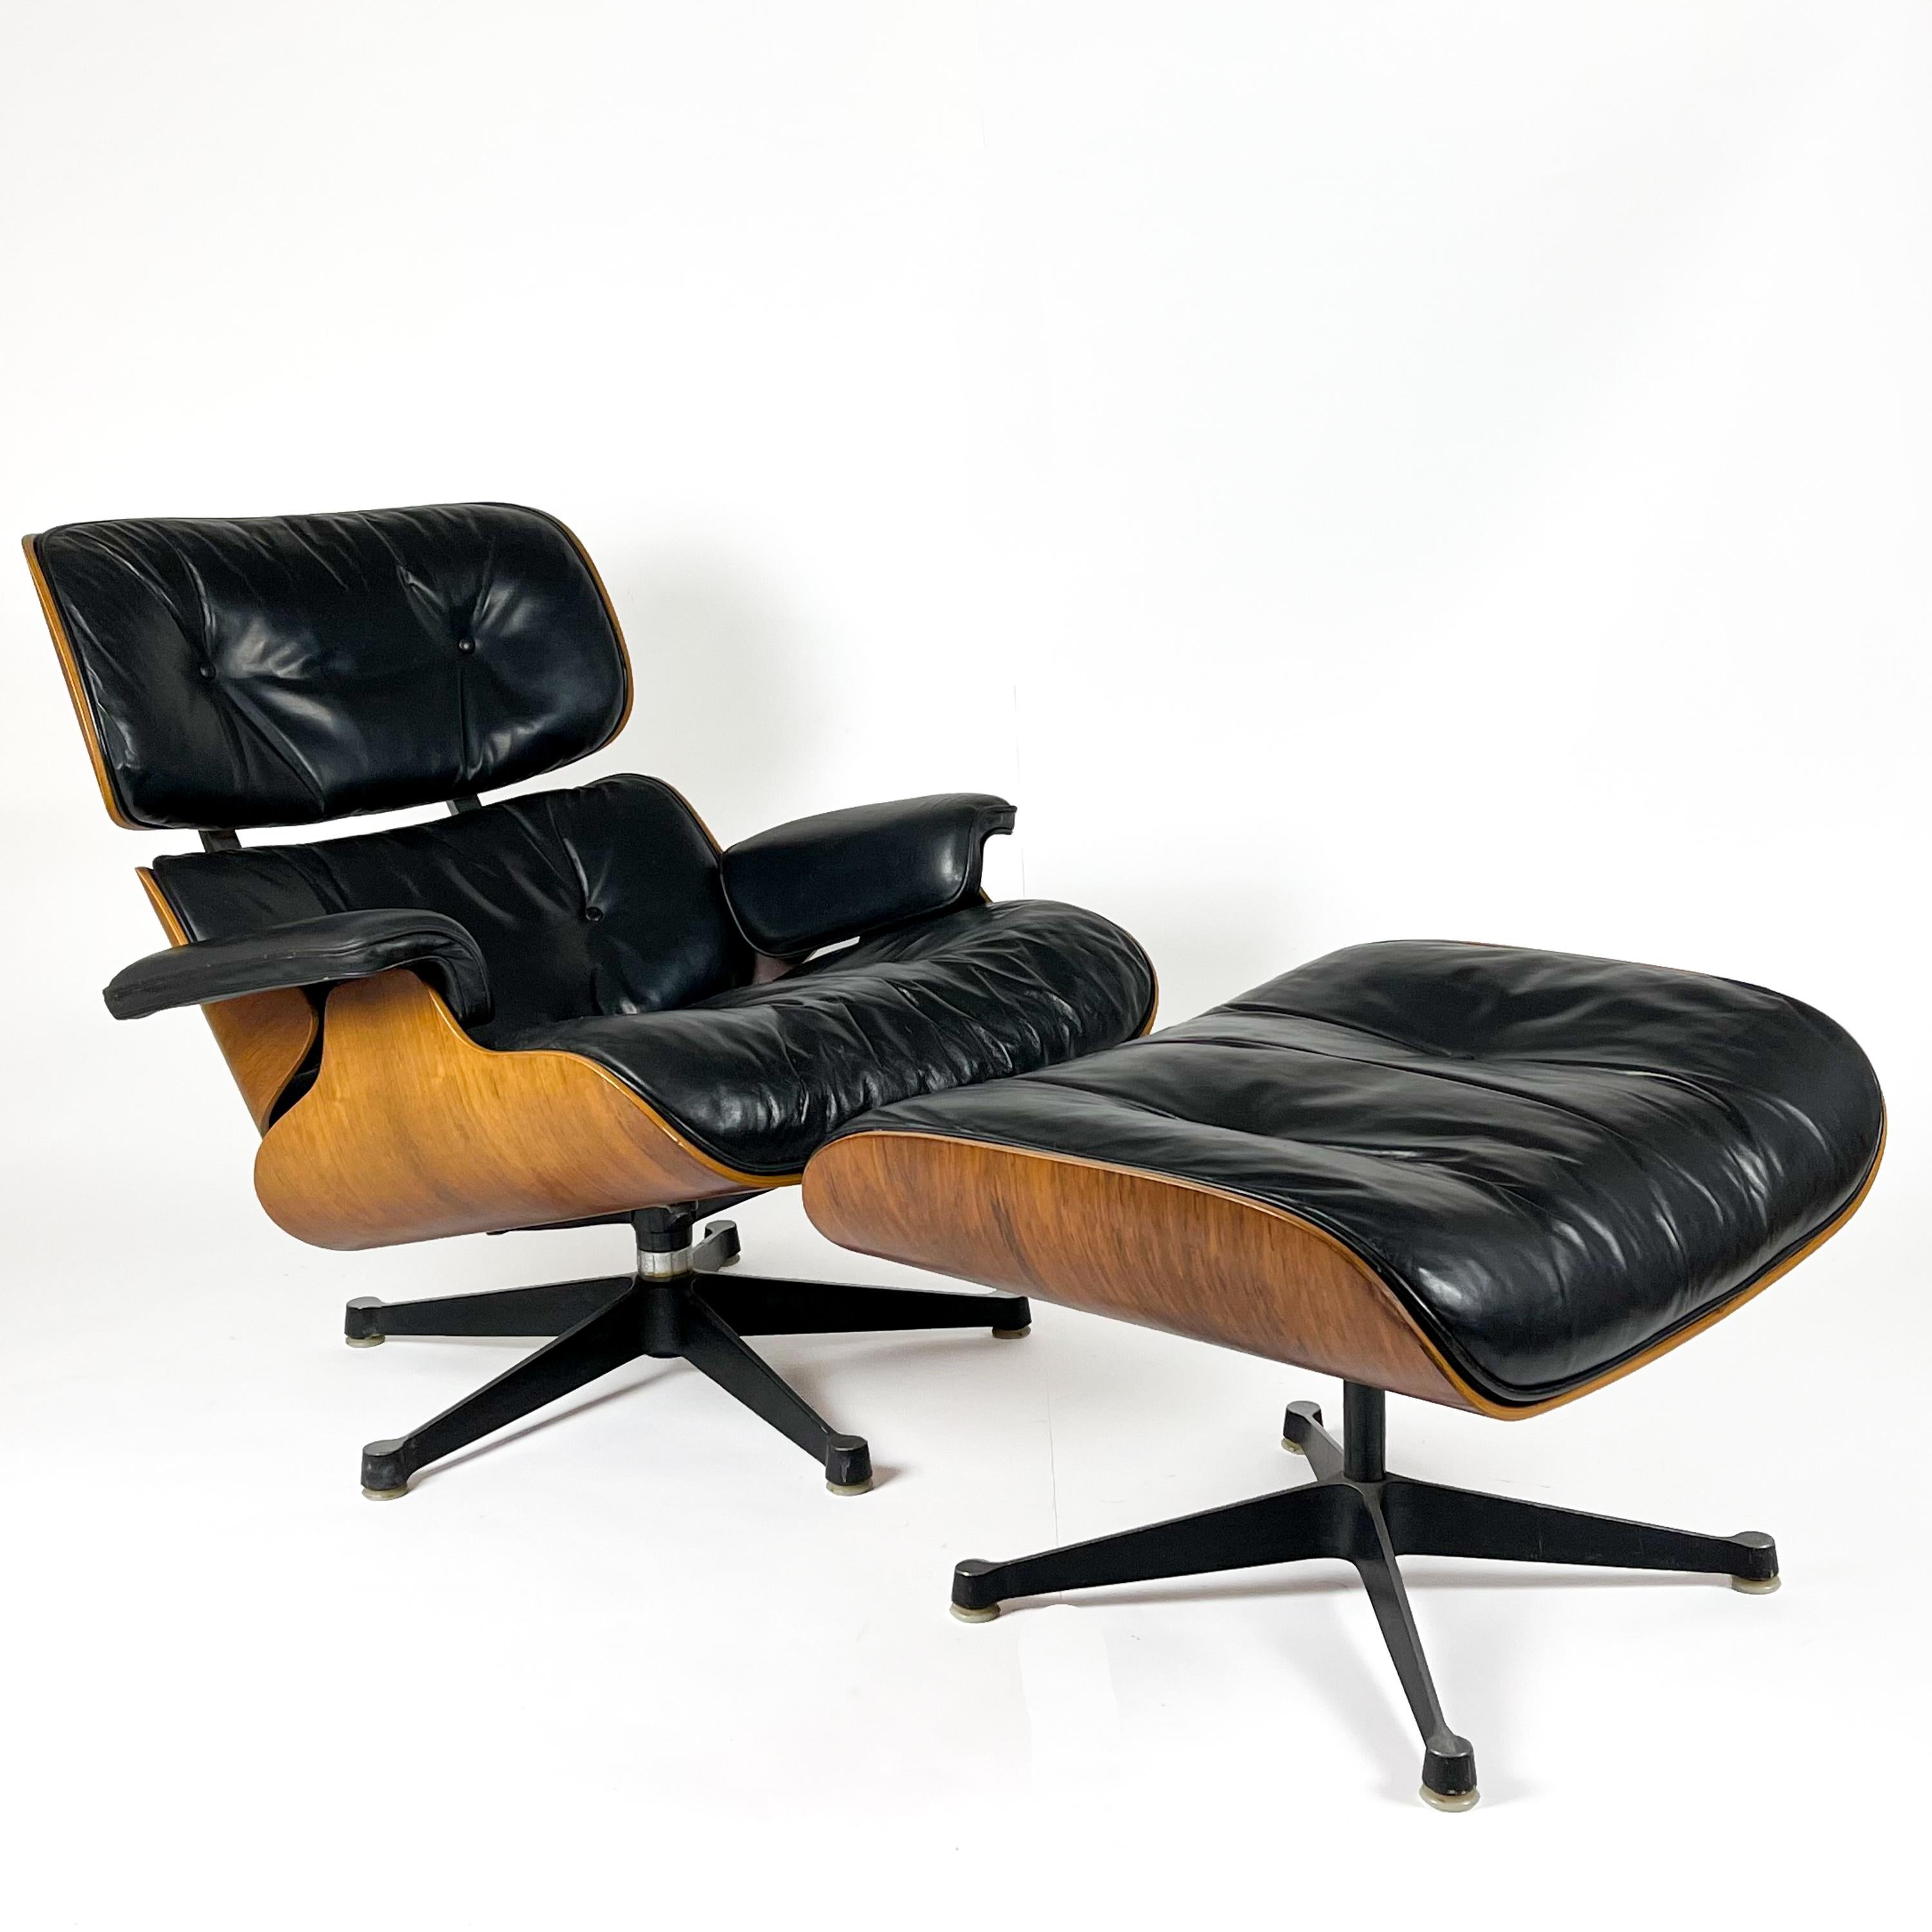 Charles and Ray Eames - Lounge chair and ottoman matching vintage set, Vitra 1968

Artist
Charles Eames (1907 Saint Louis, USA - 1978 Los Angeles, USA) and his wife Ray Eames - Kaiser (1912 Sacramento, USA - 1988 Los Angeles, USA) hardly need